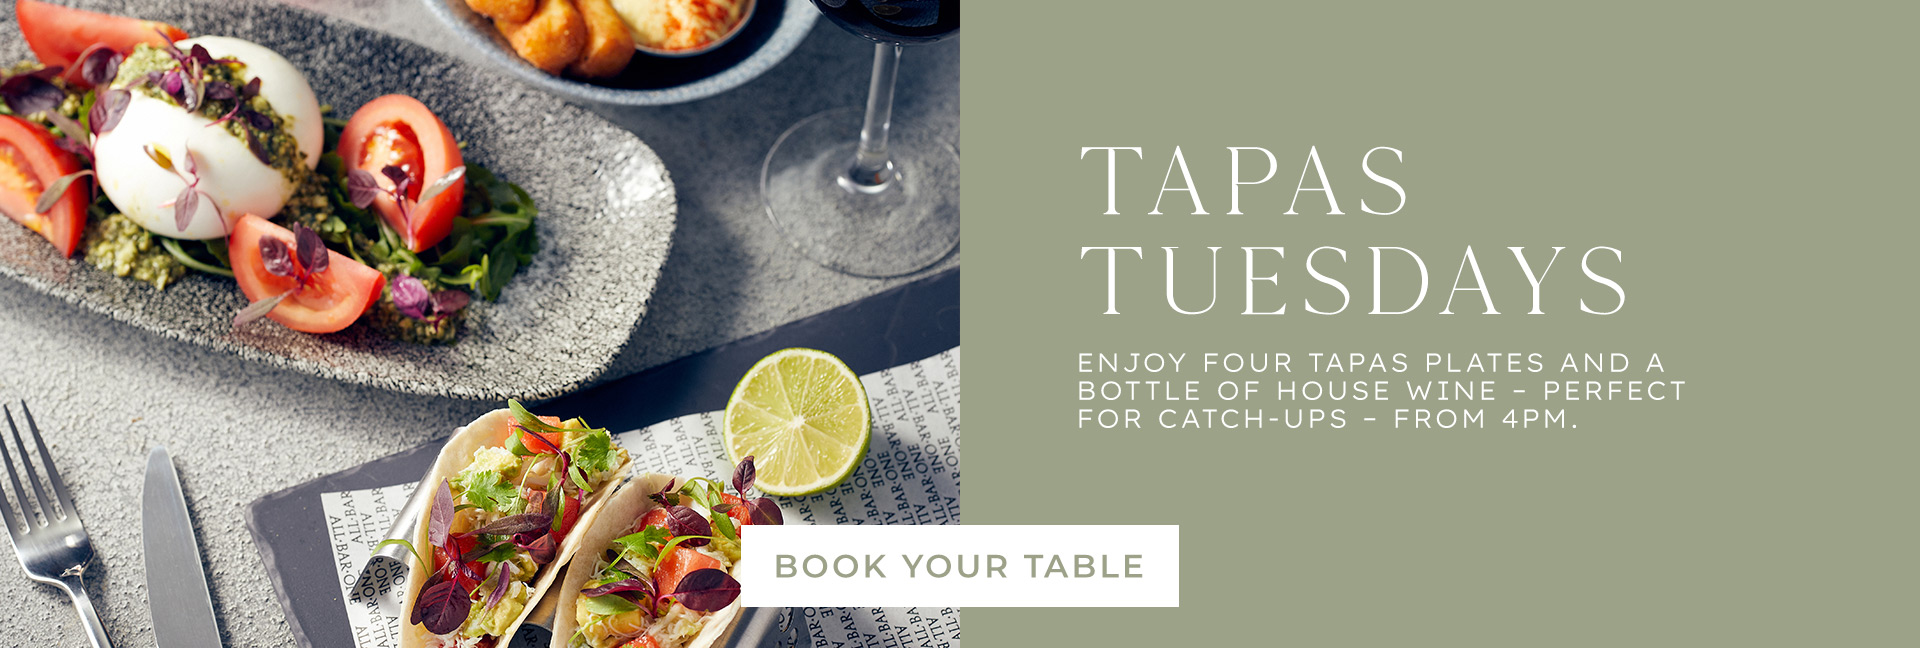 Tapas Tuesday at All Bar One The O2 - Book now